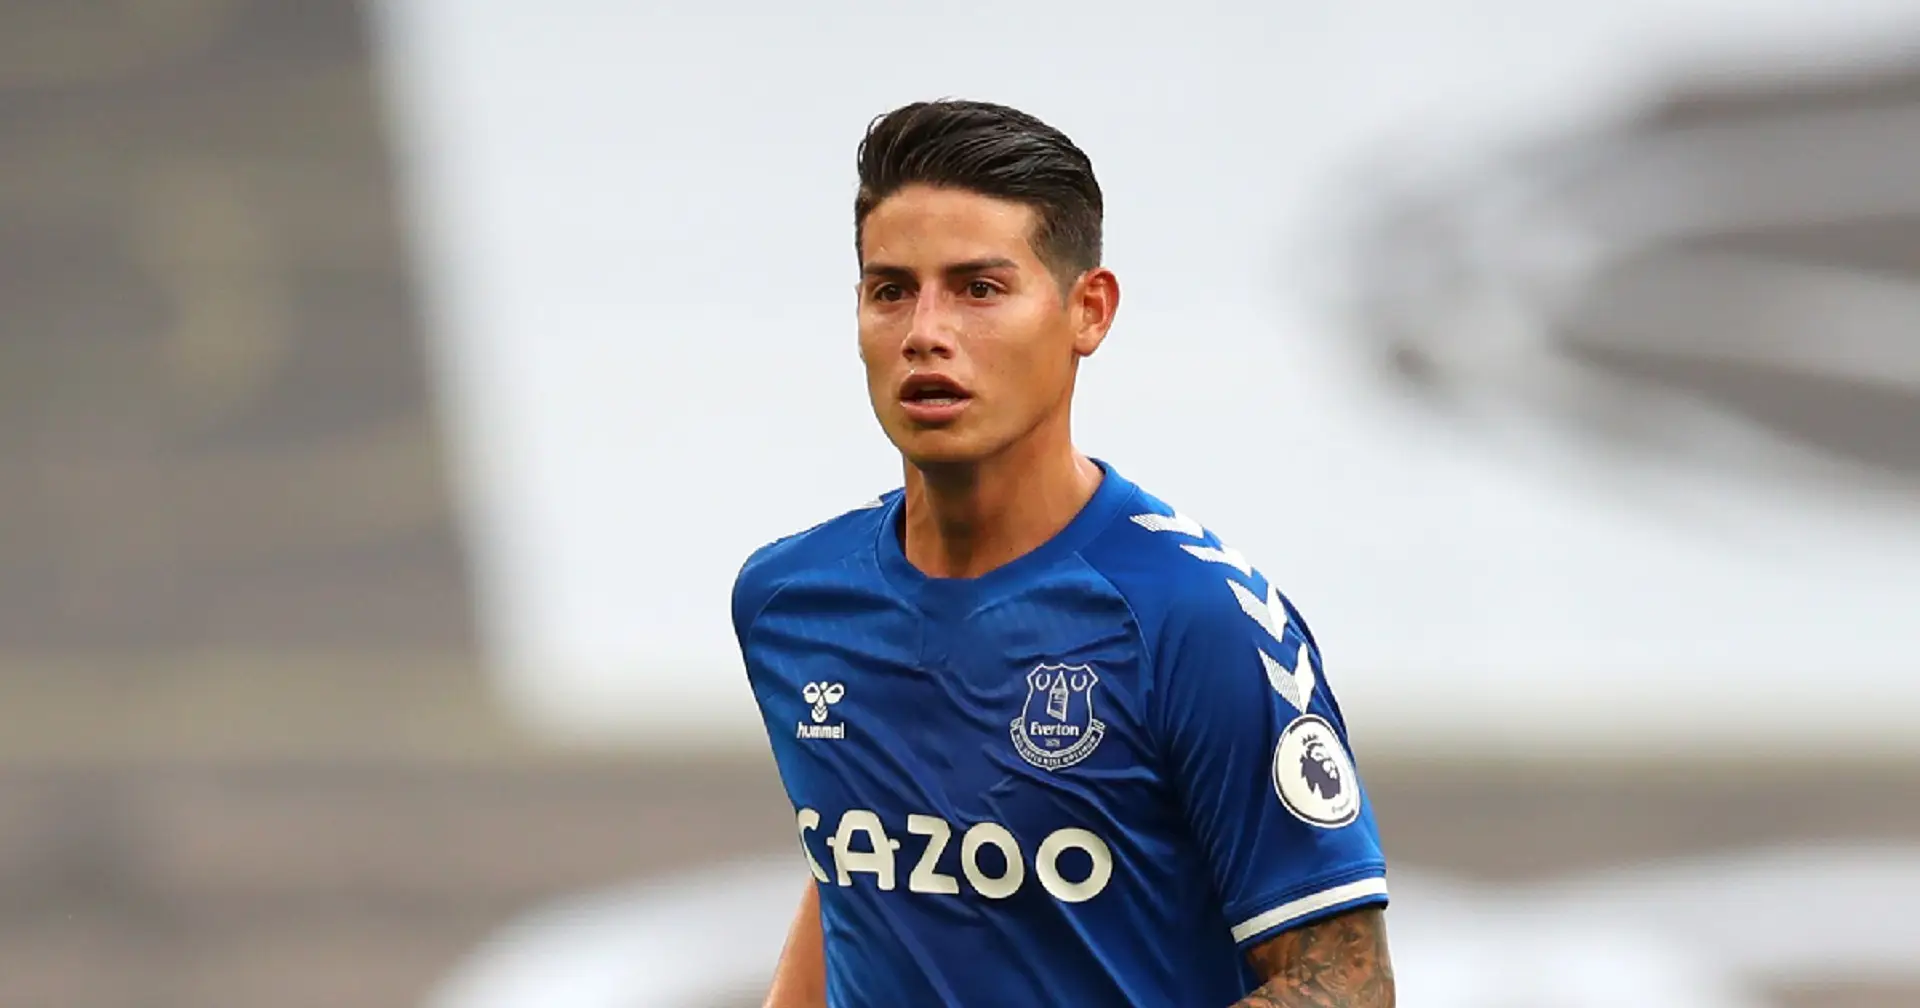 Heart of gold: James donates part salary to former club Banfield following free transfer to Everton